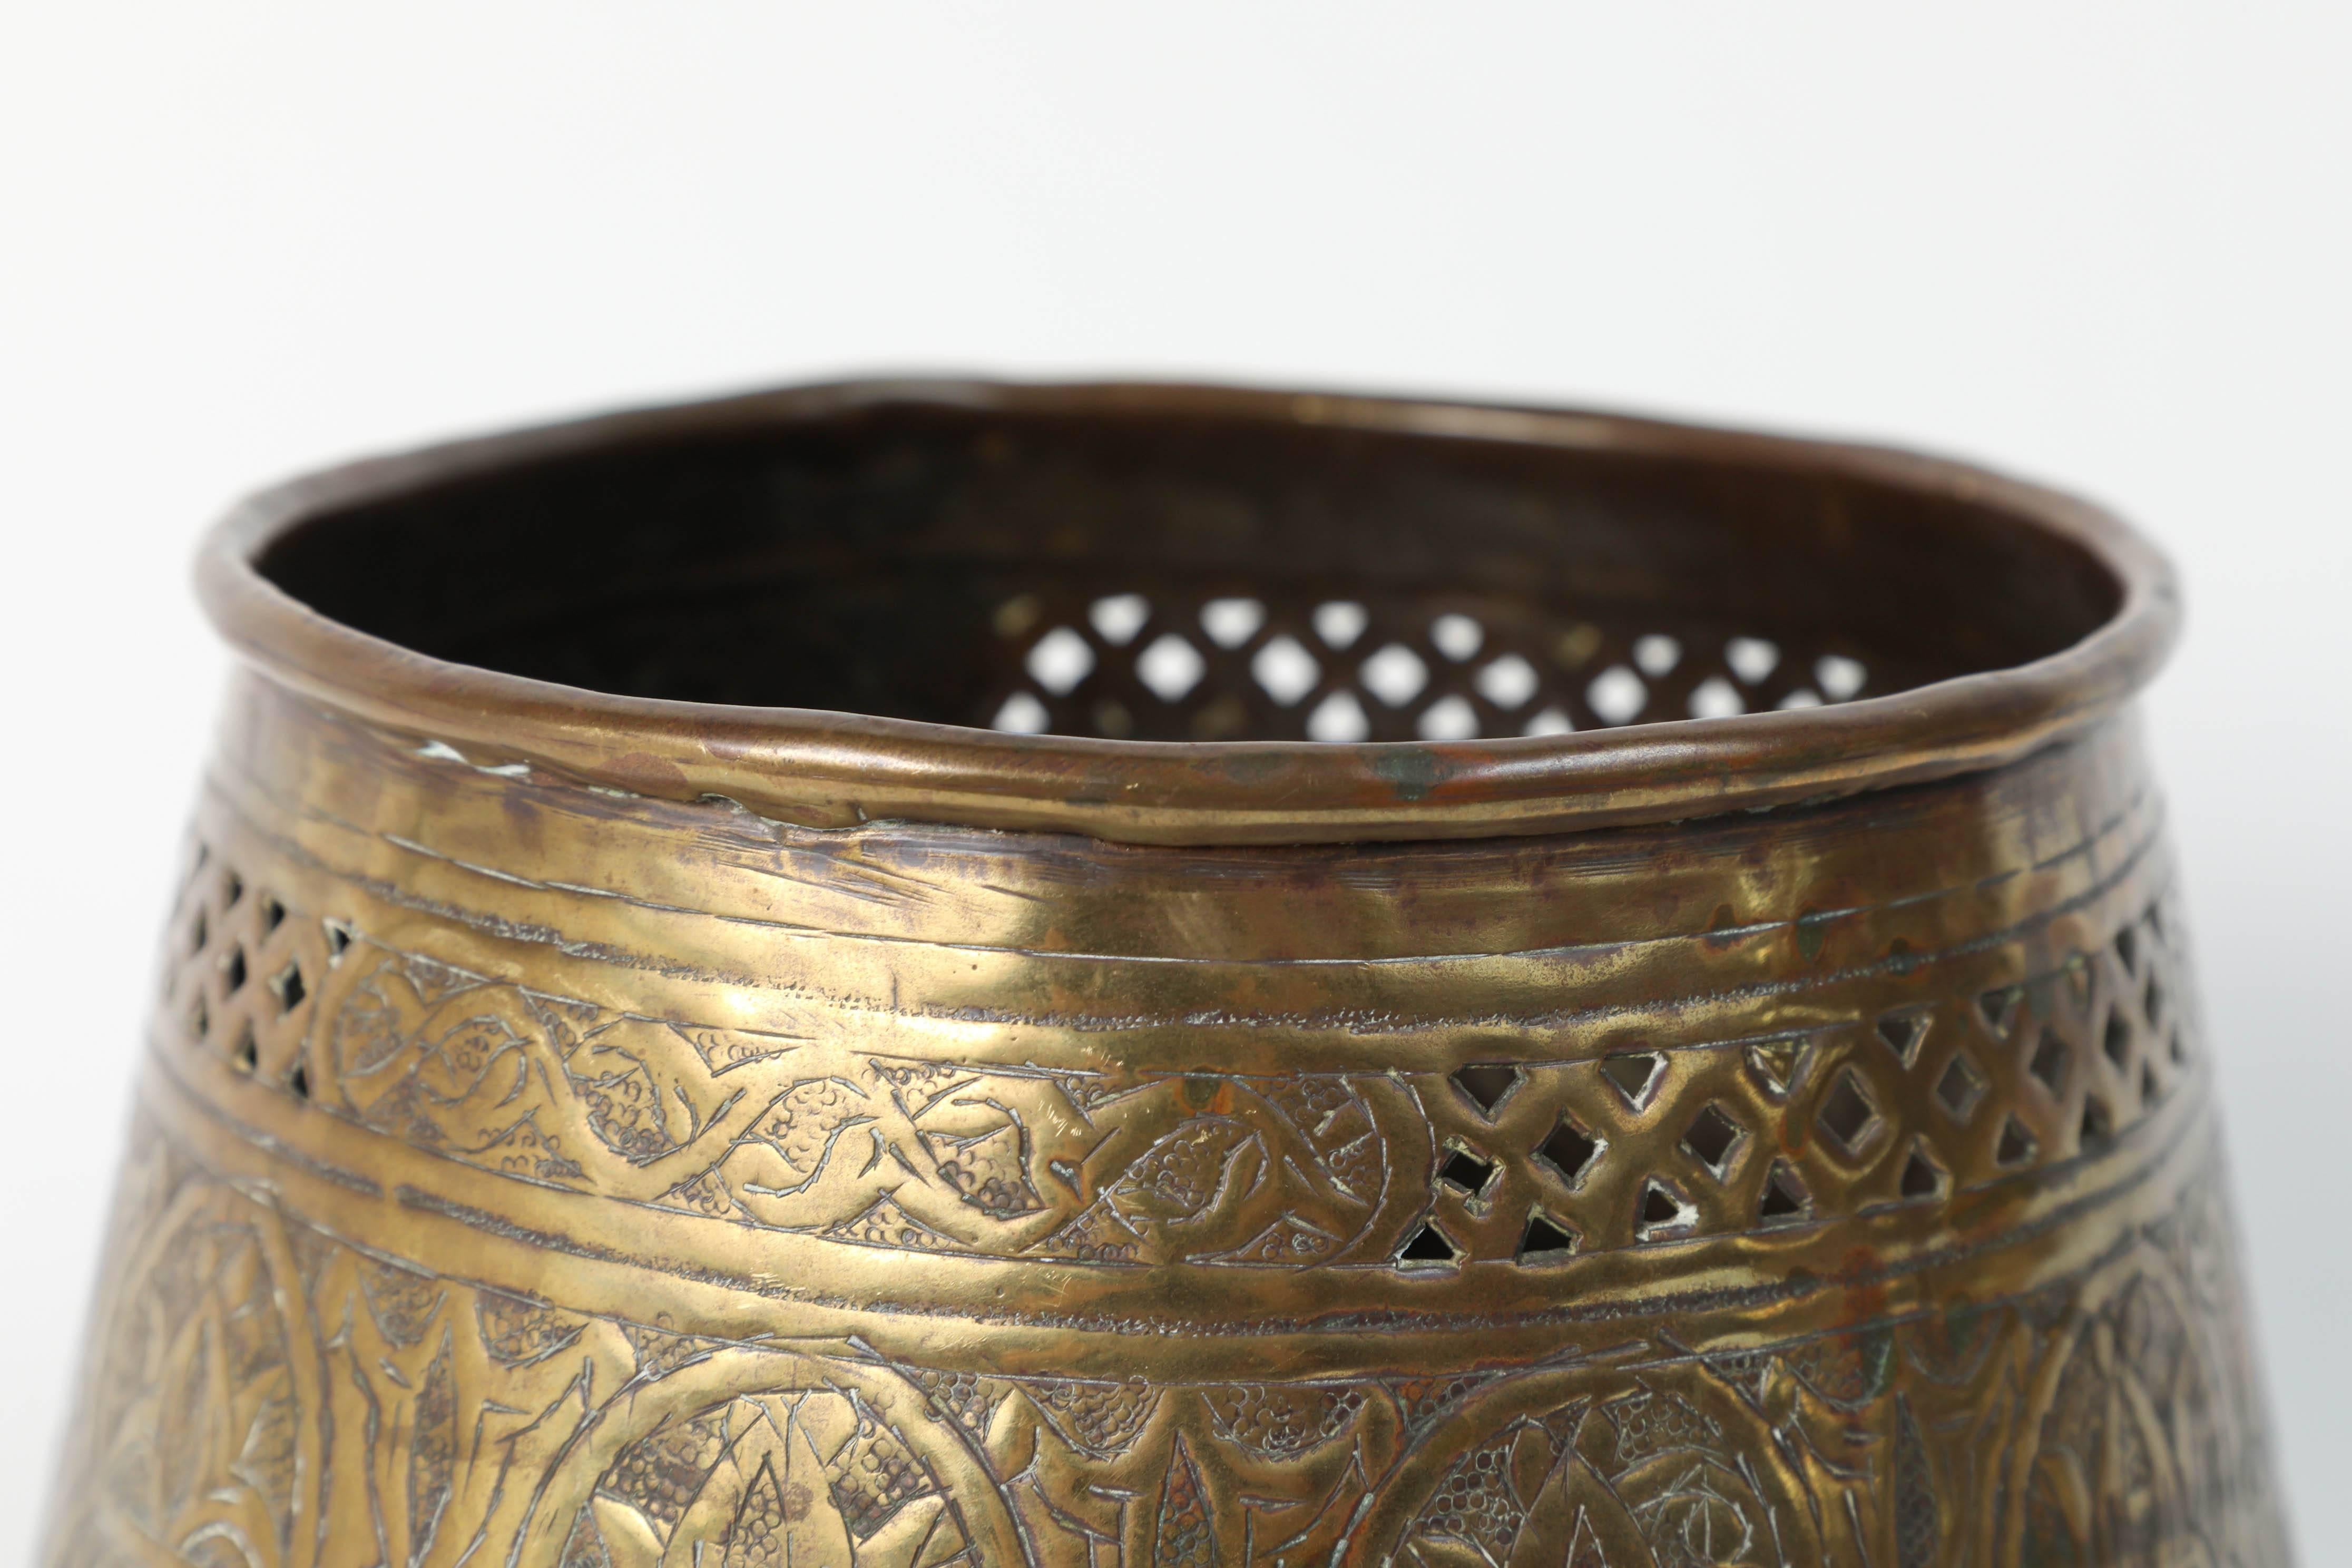 Moorish Middle Eastern Syrian Brass Islamic Art Bowl Engraved with Arabic Calligraphy